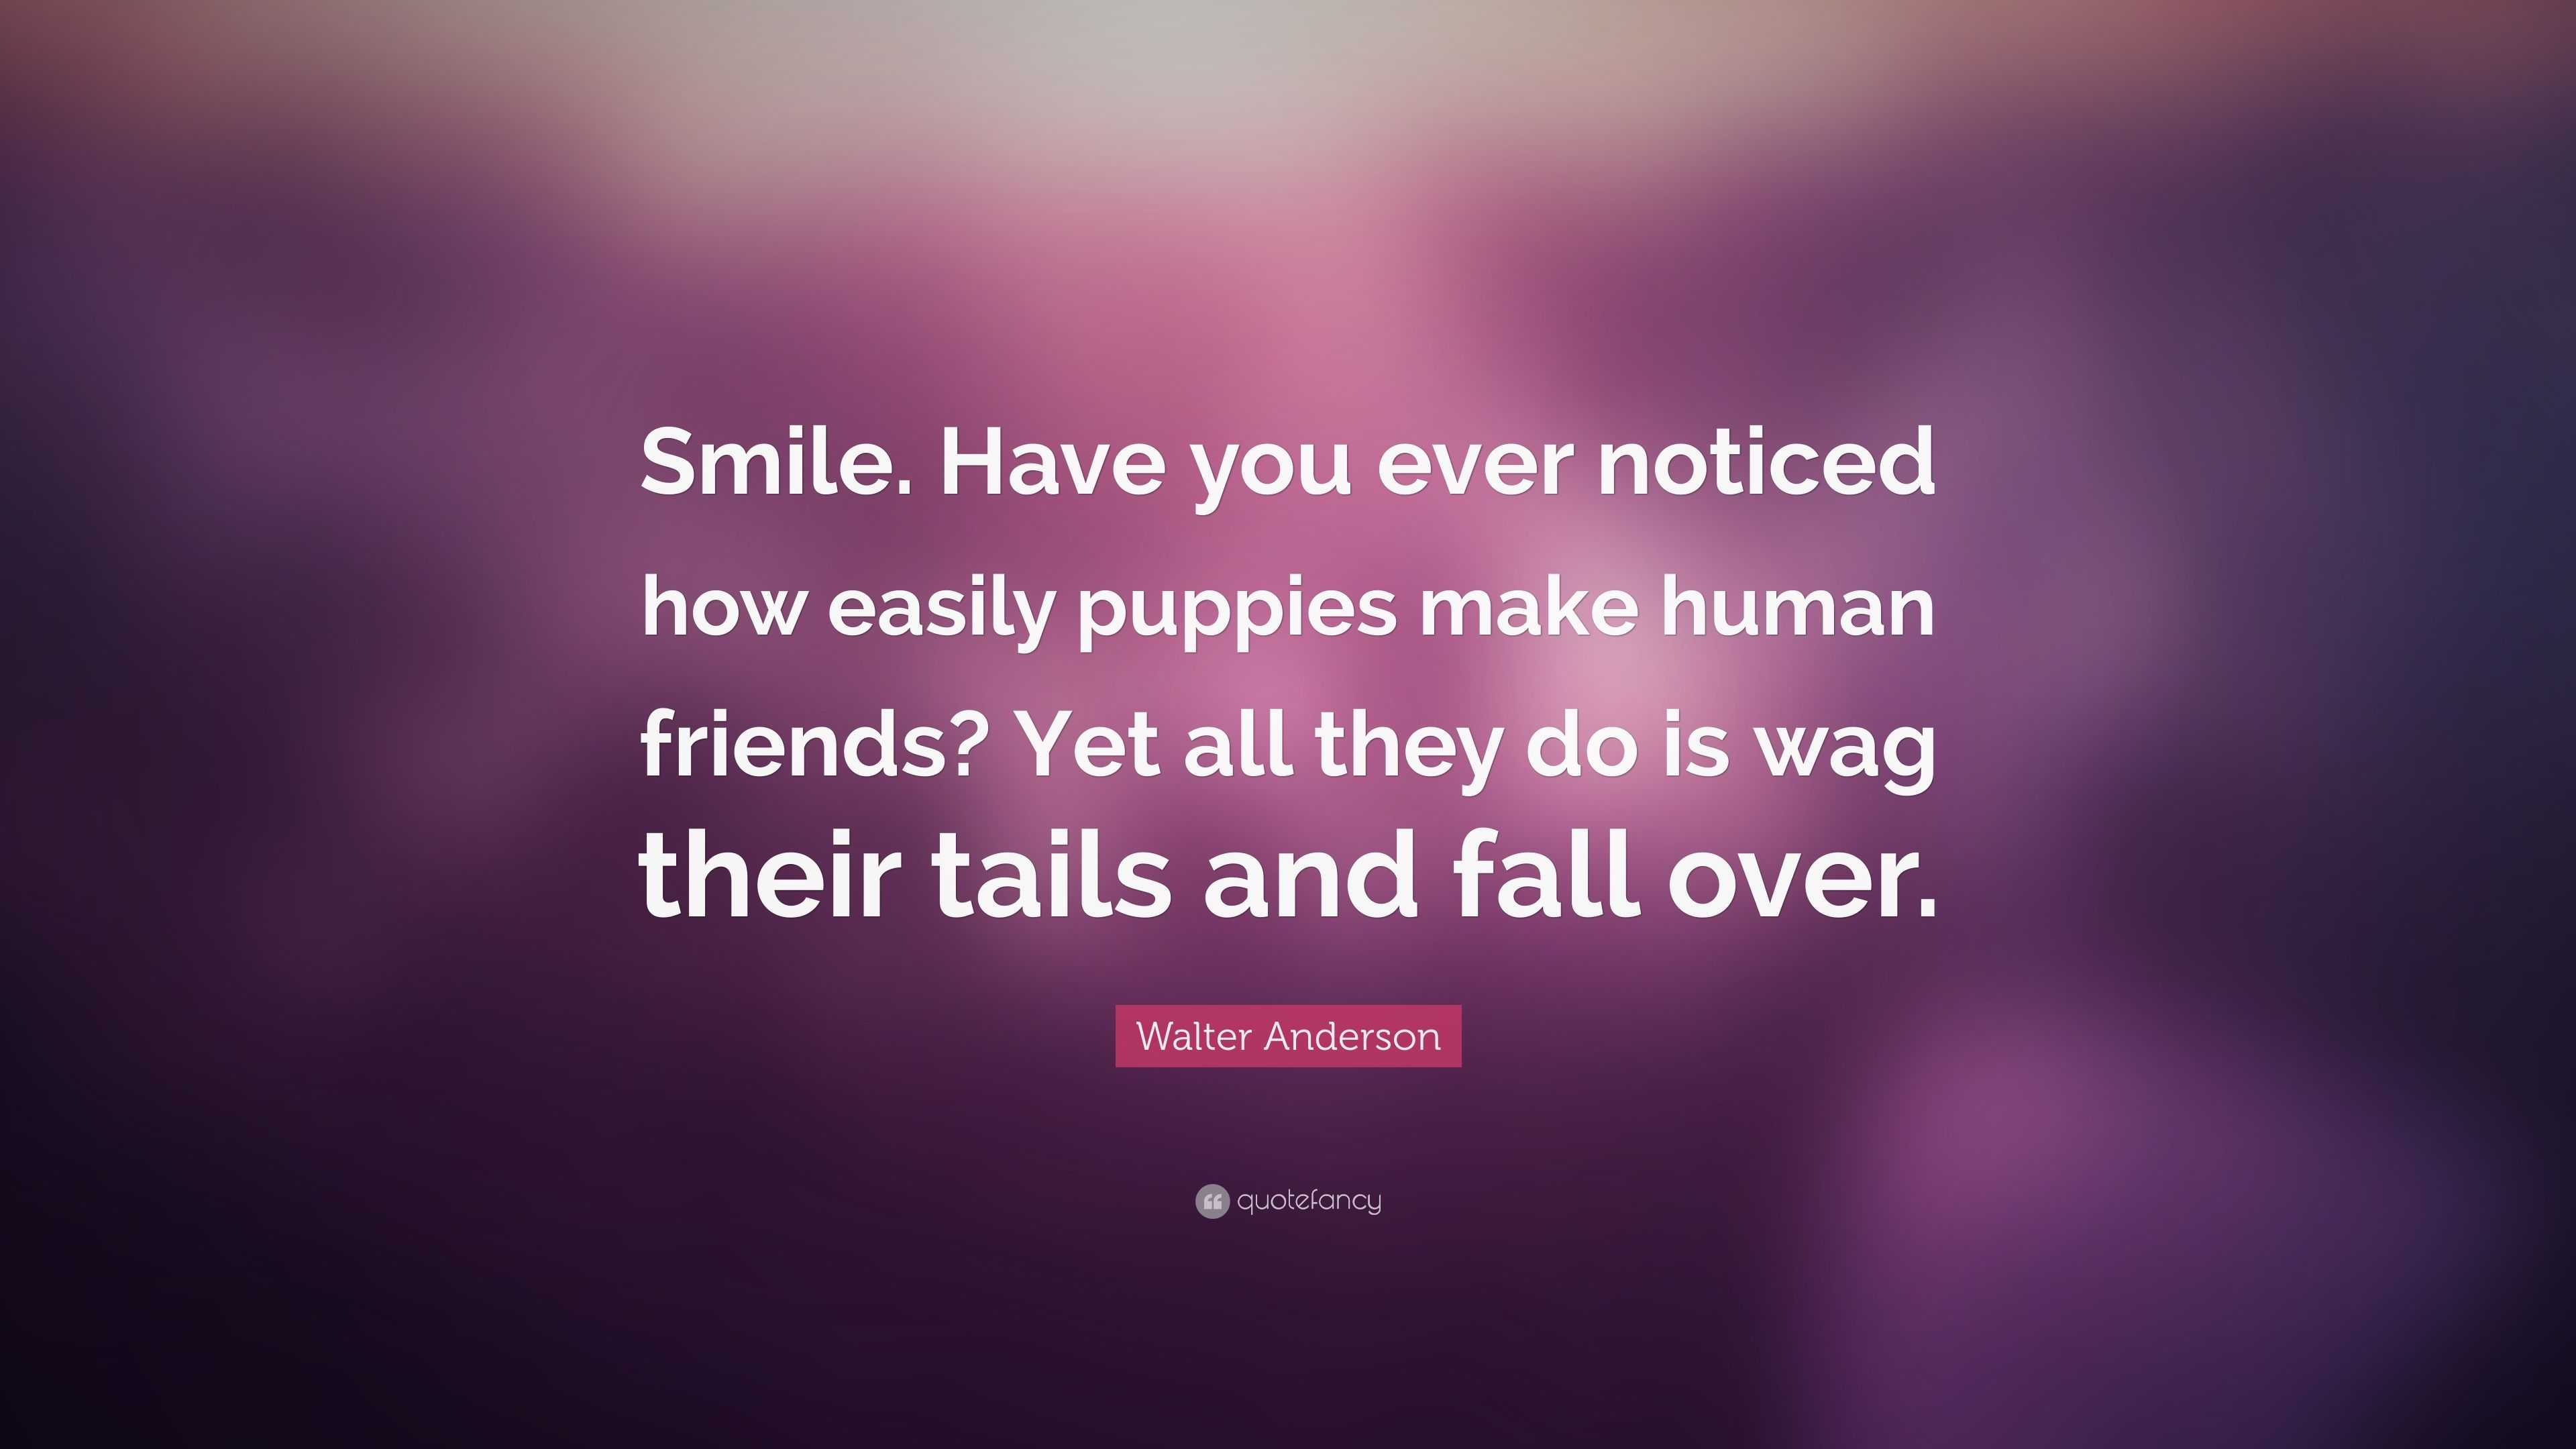 Walter Anderson Quote: “Smile. Have you ever noticed how easily puppies ...